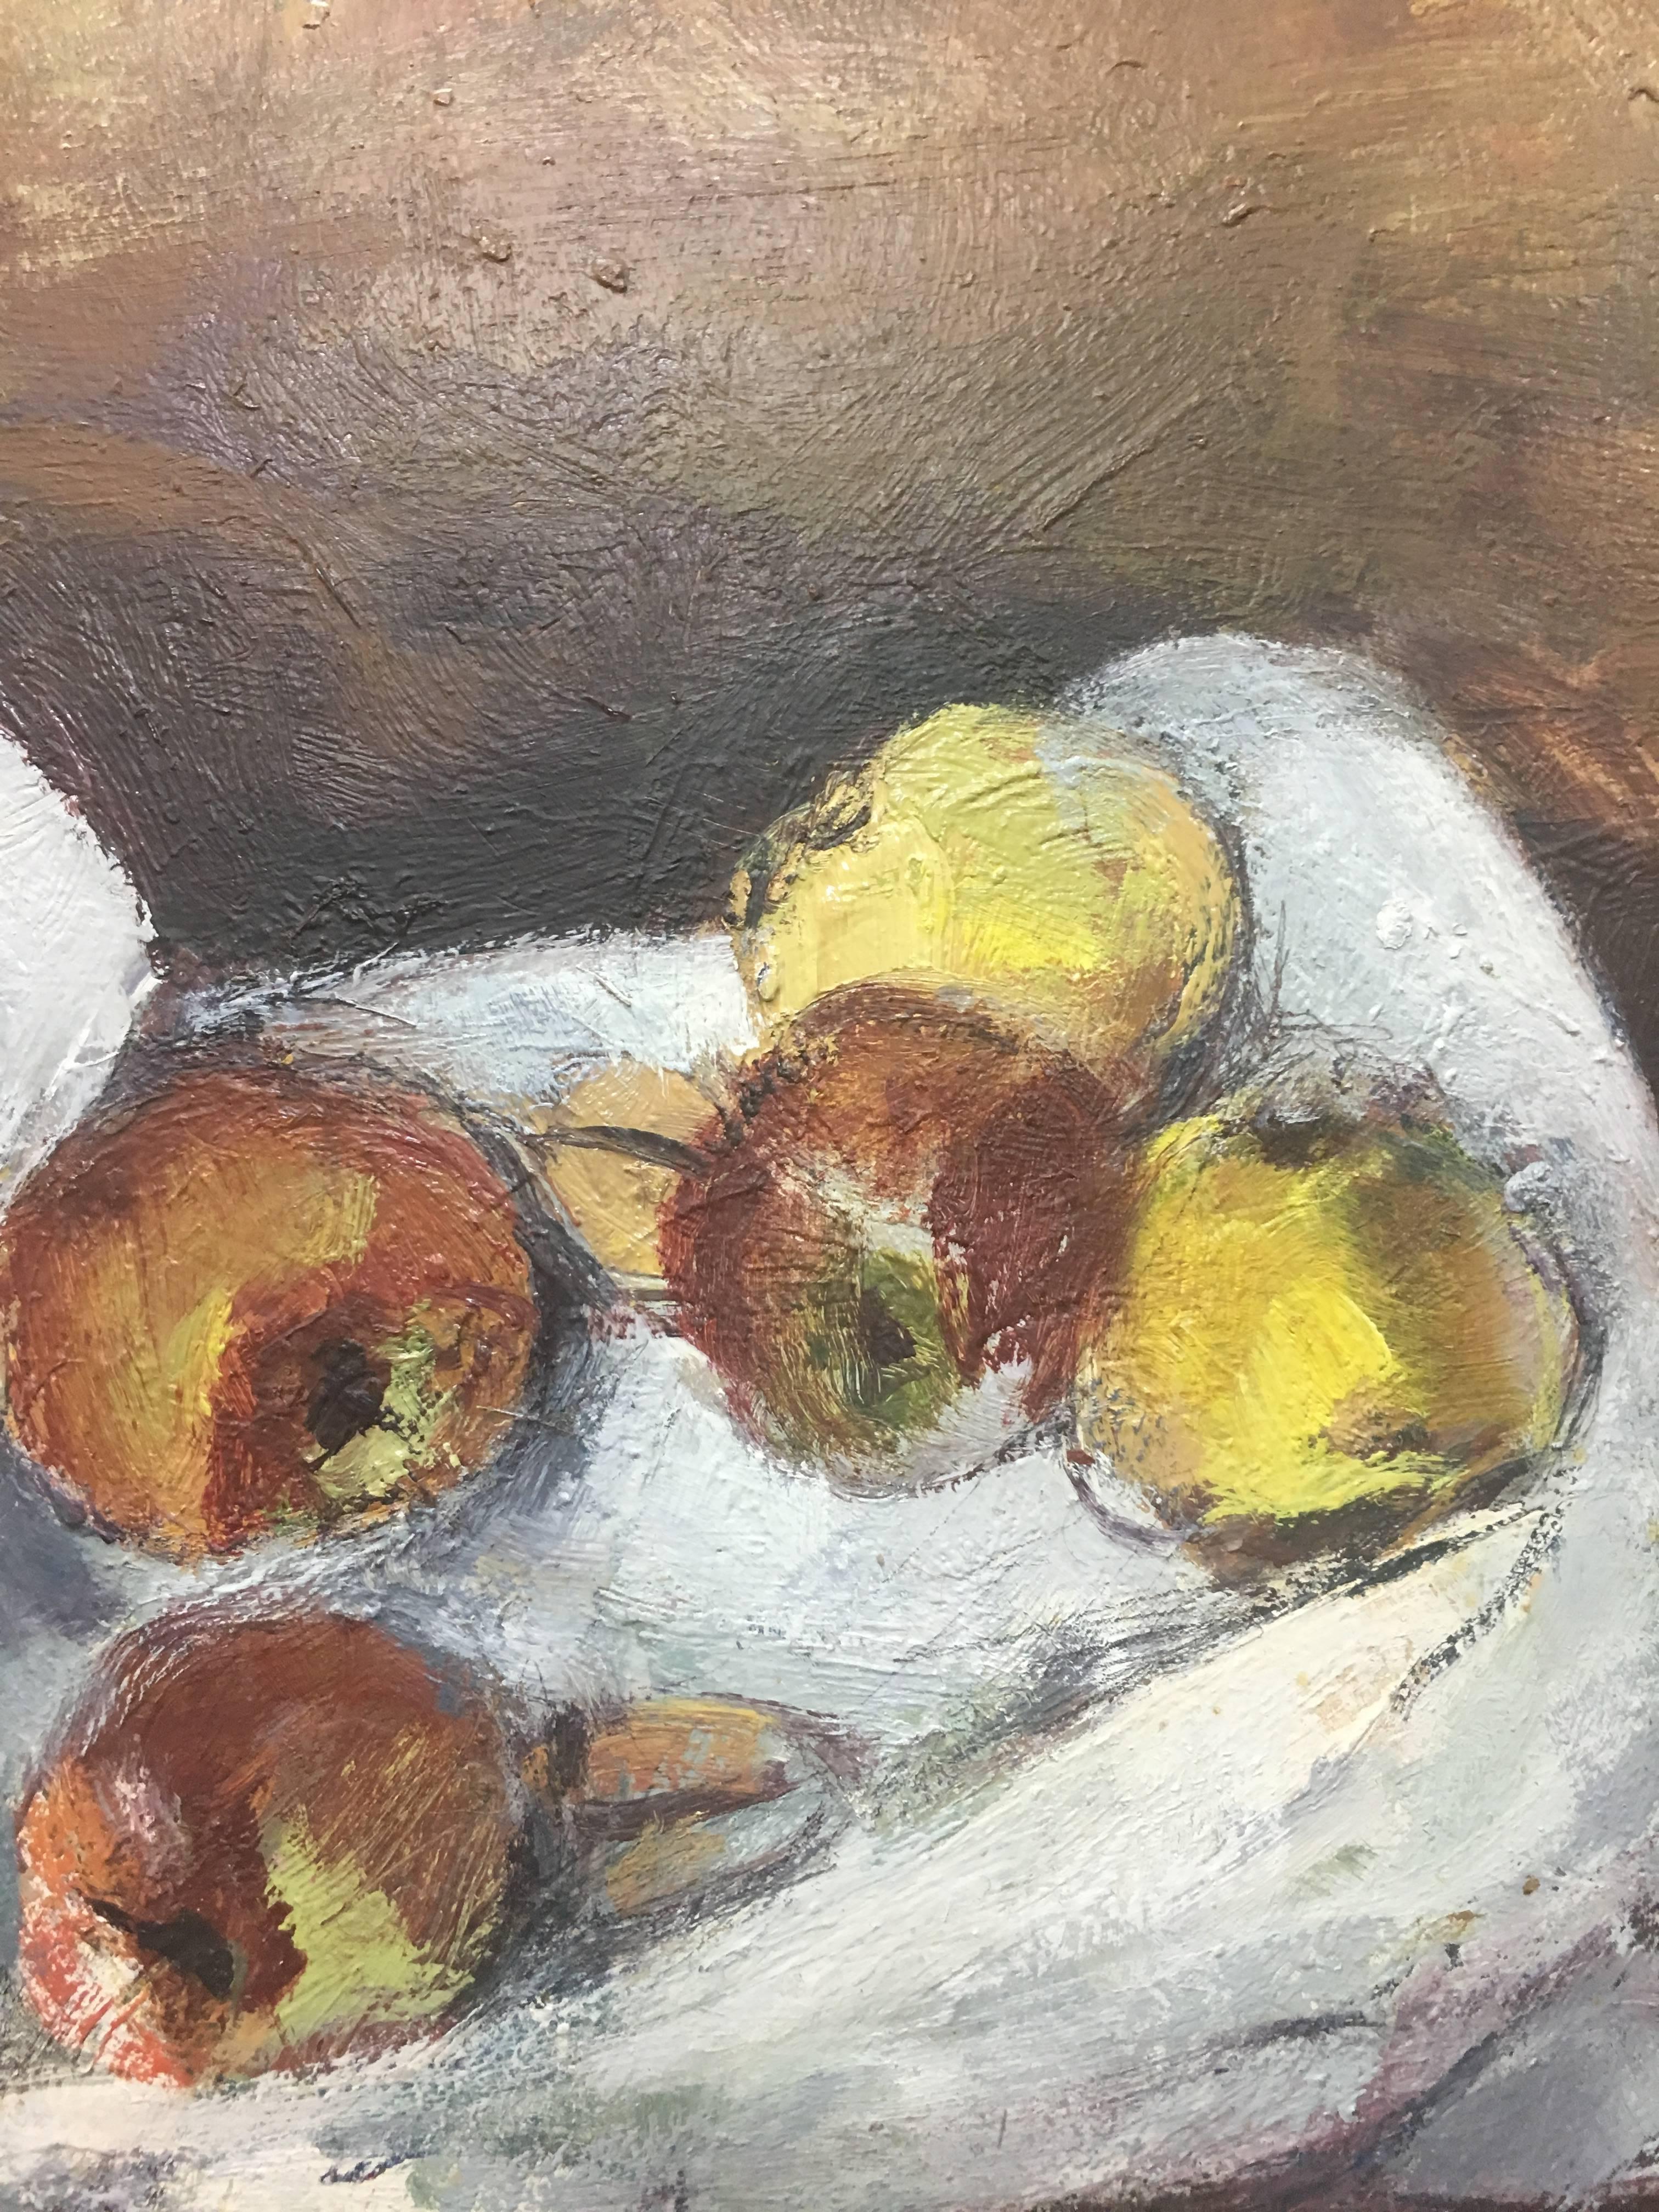  Abella  Fruits  Vertical   original still life Cubist acrylic painting For Sale 3